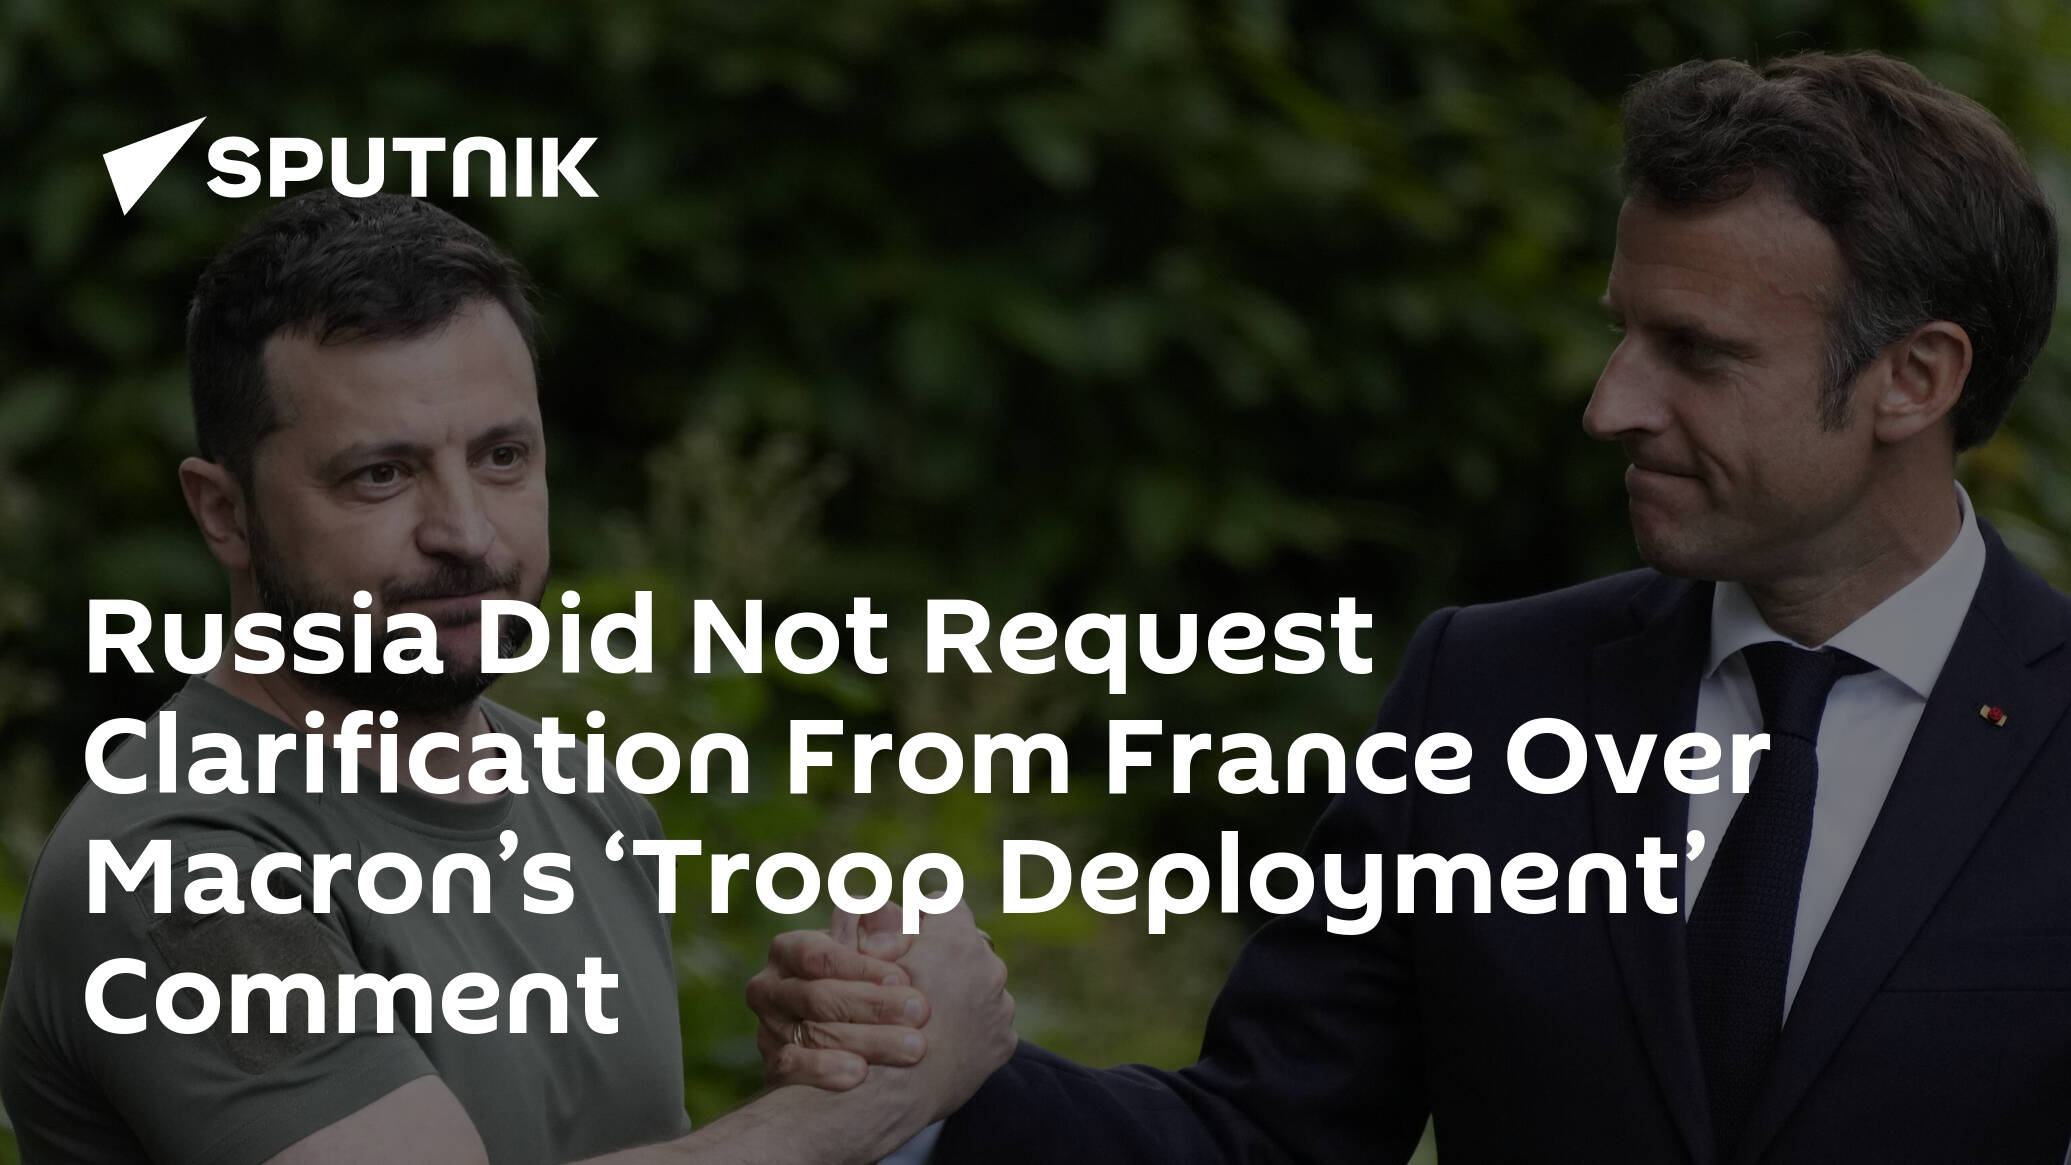 Russia Did Not Request Clarification From France Over Macron’s ‘Troop Deployment’ Comment